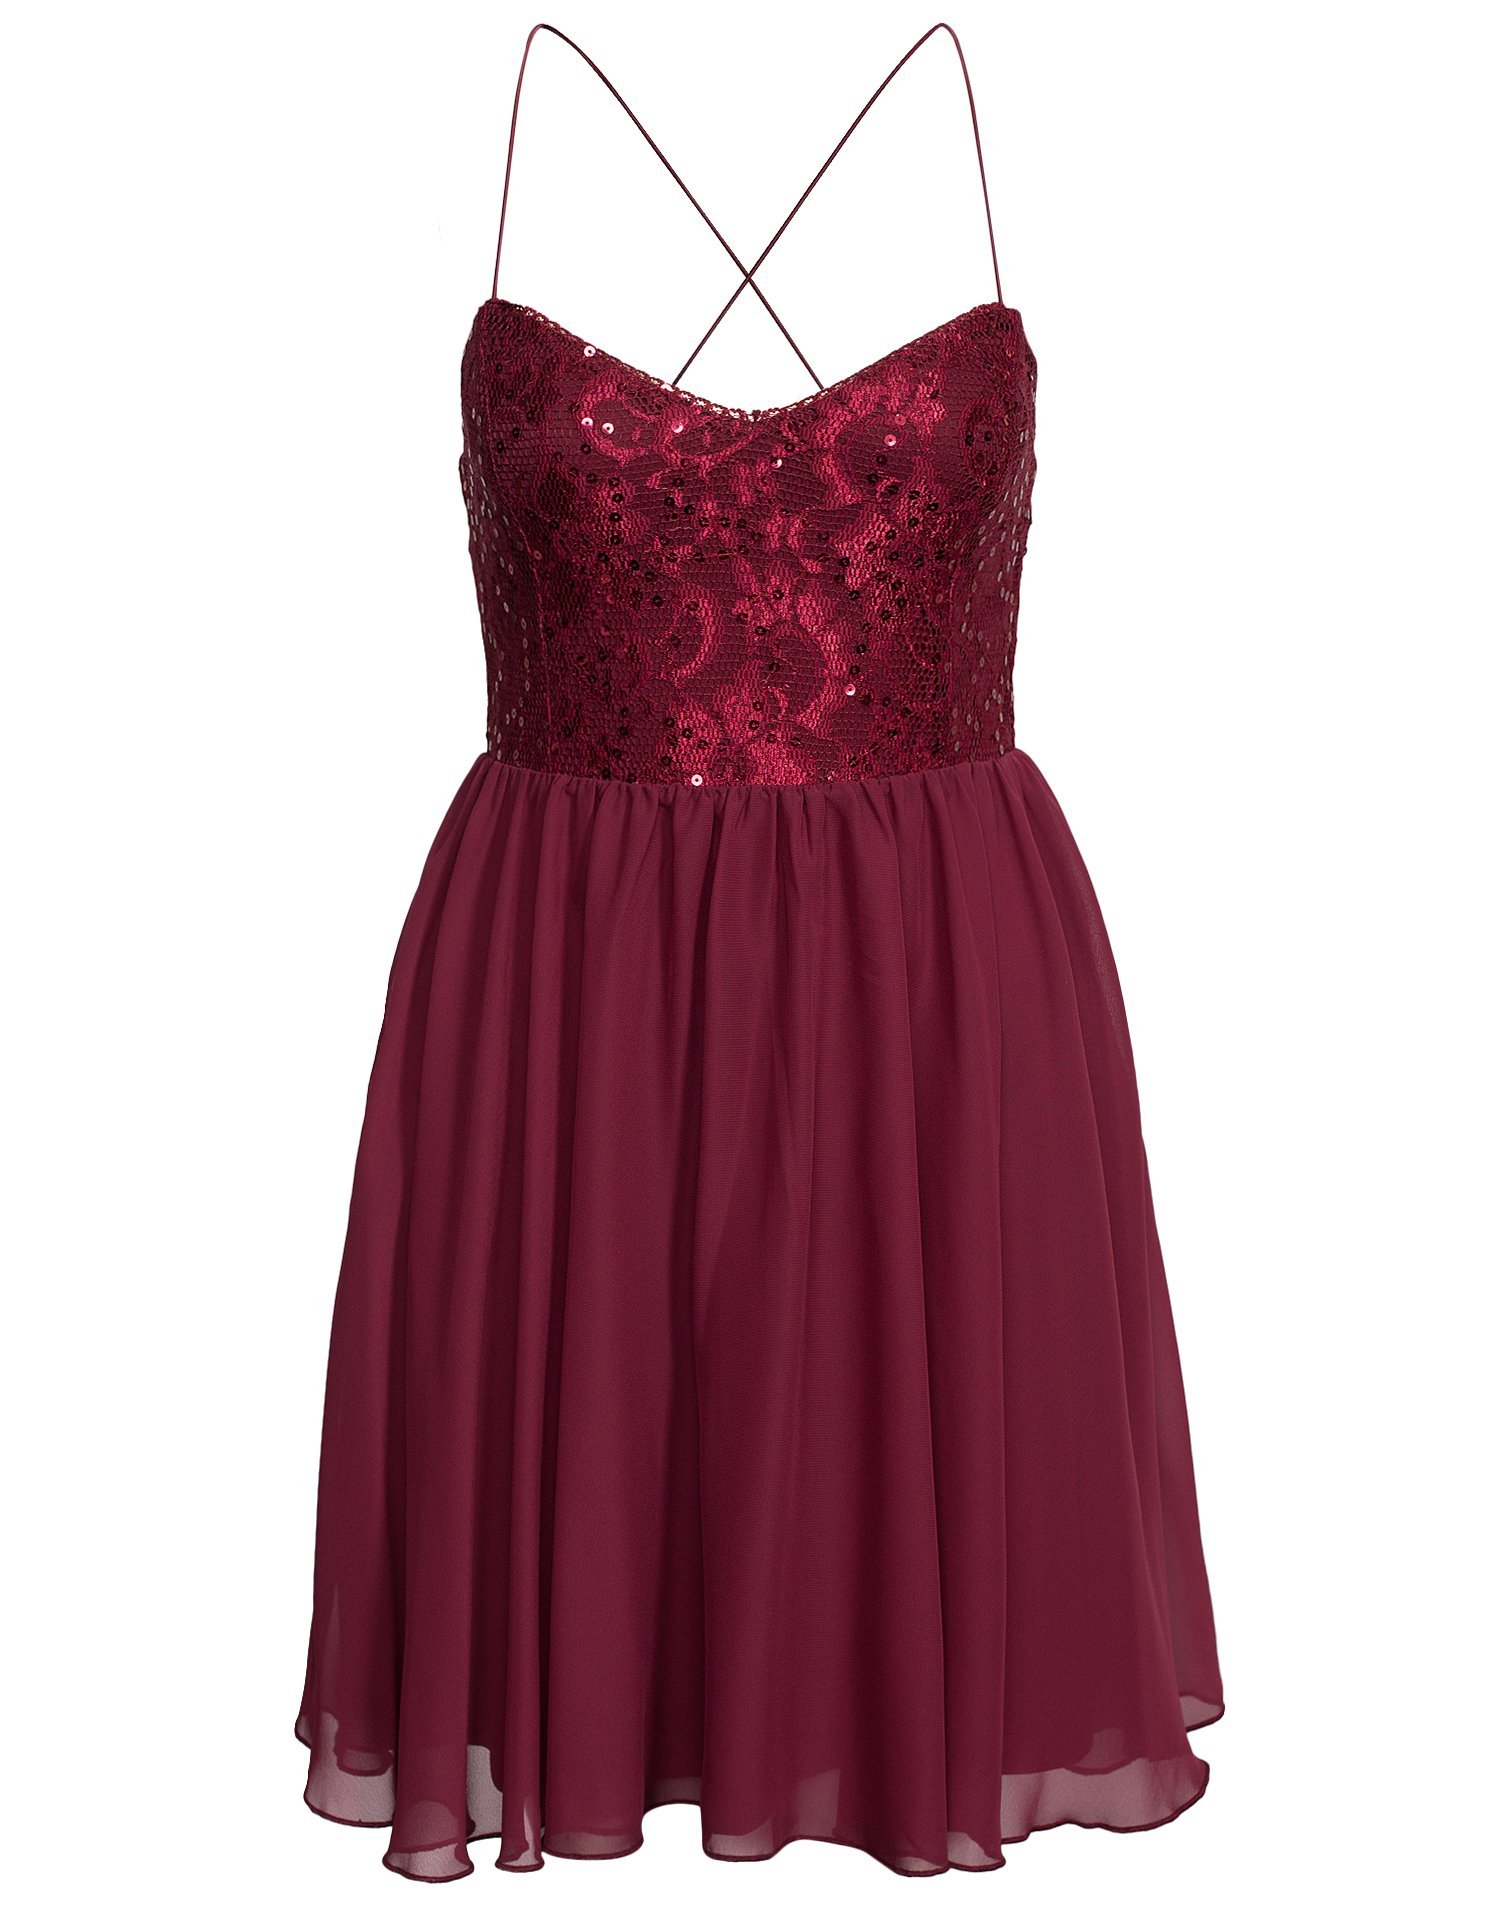 Shimmery Flare Dress - Nly One - Burgundy - Party Dresses - Clothing ...